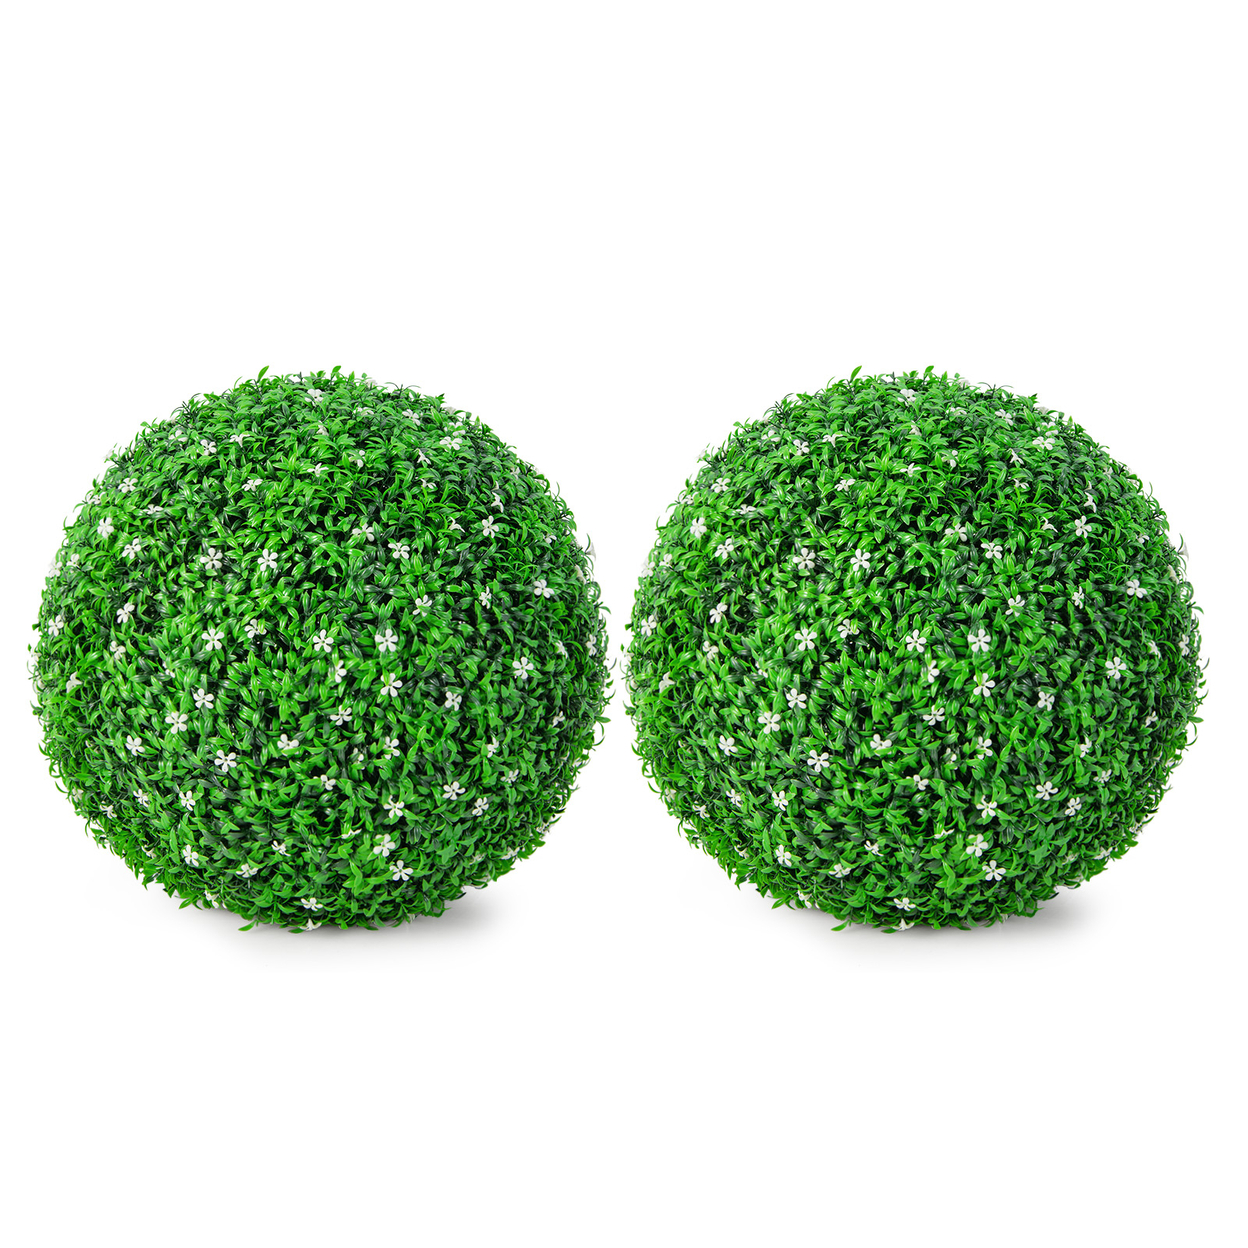 2 PCS Artificial White Flower Grass Topiary Balls 19'' Faux Balls Indoor Outdoor